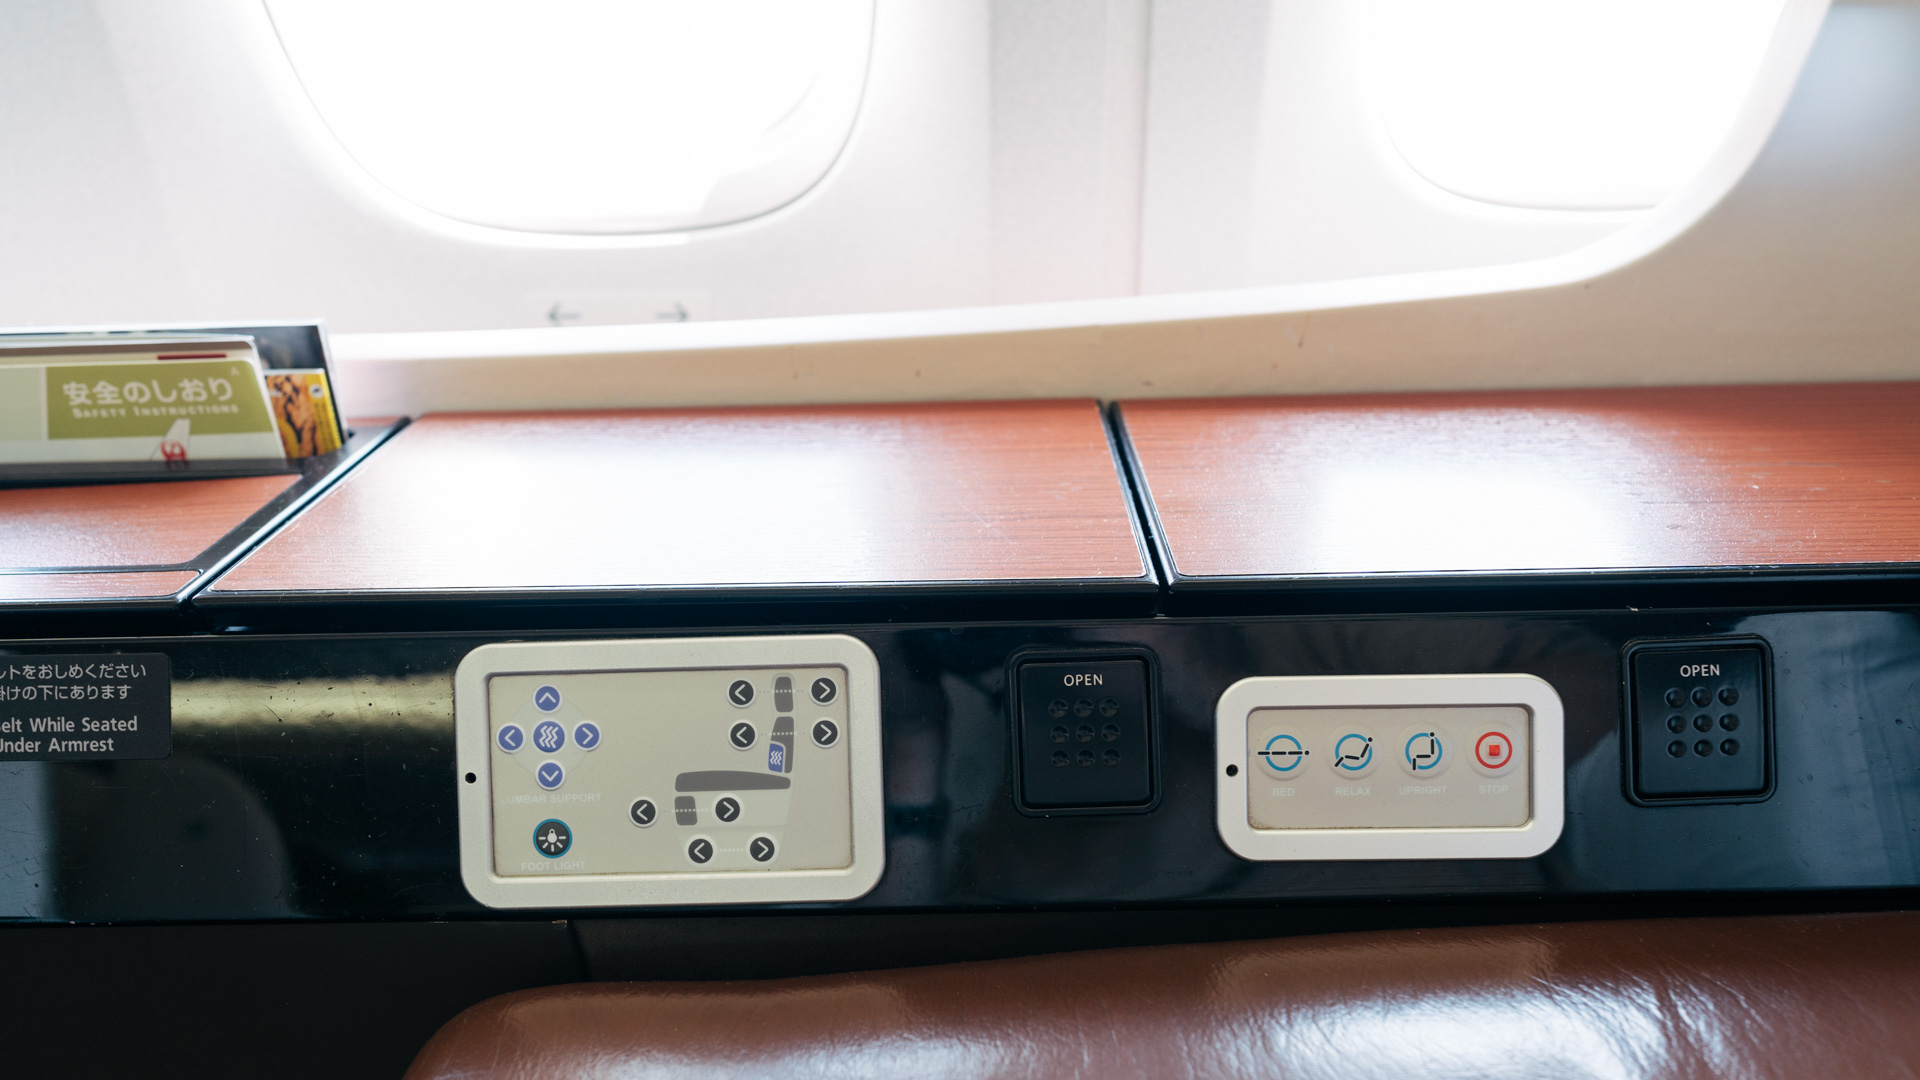 Japan Airlines Boeing 777 First Class seat controls